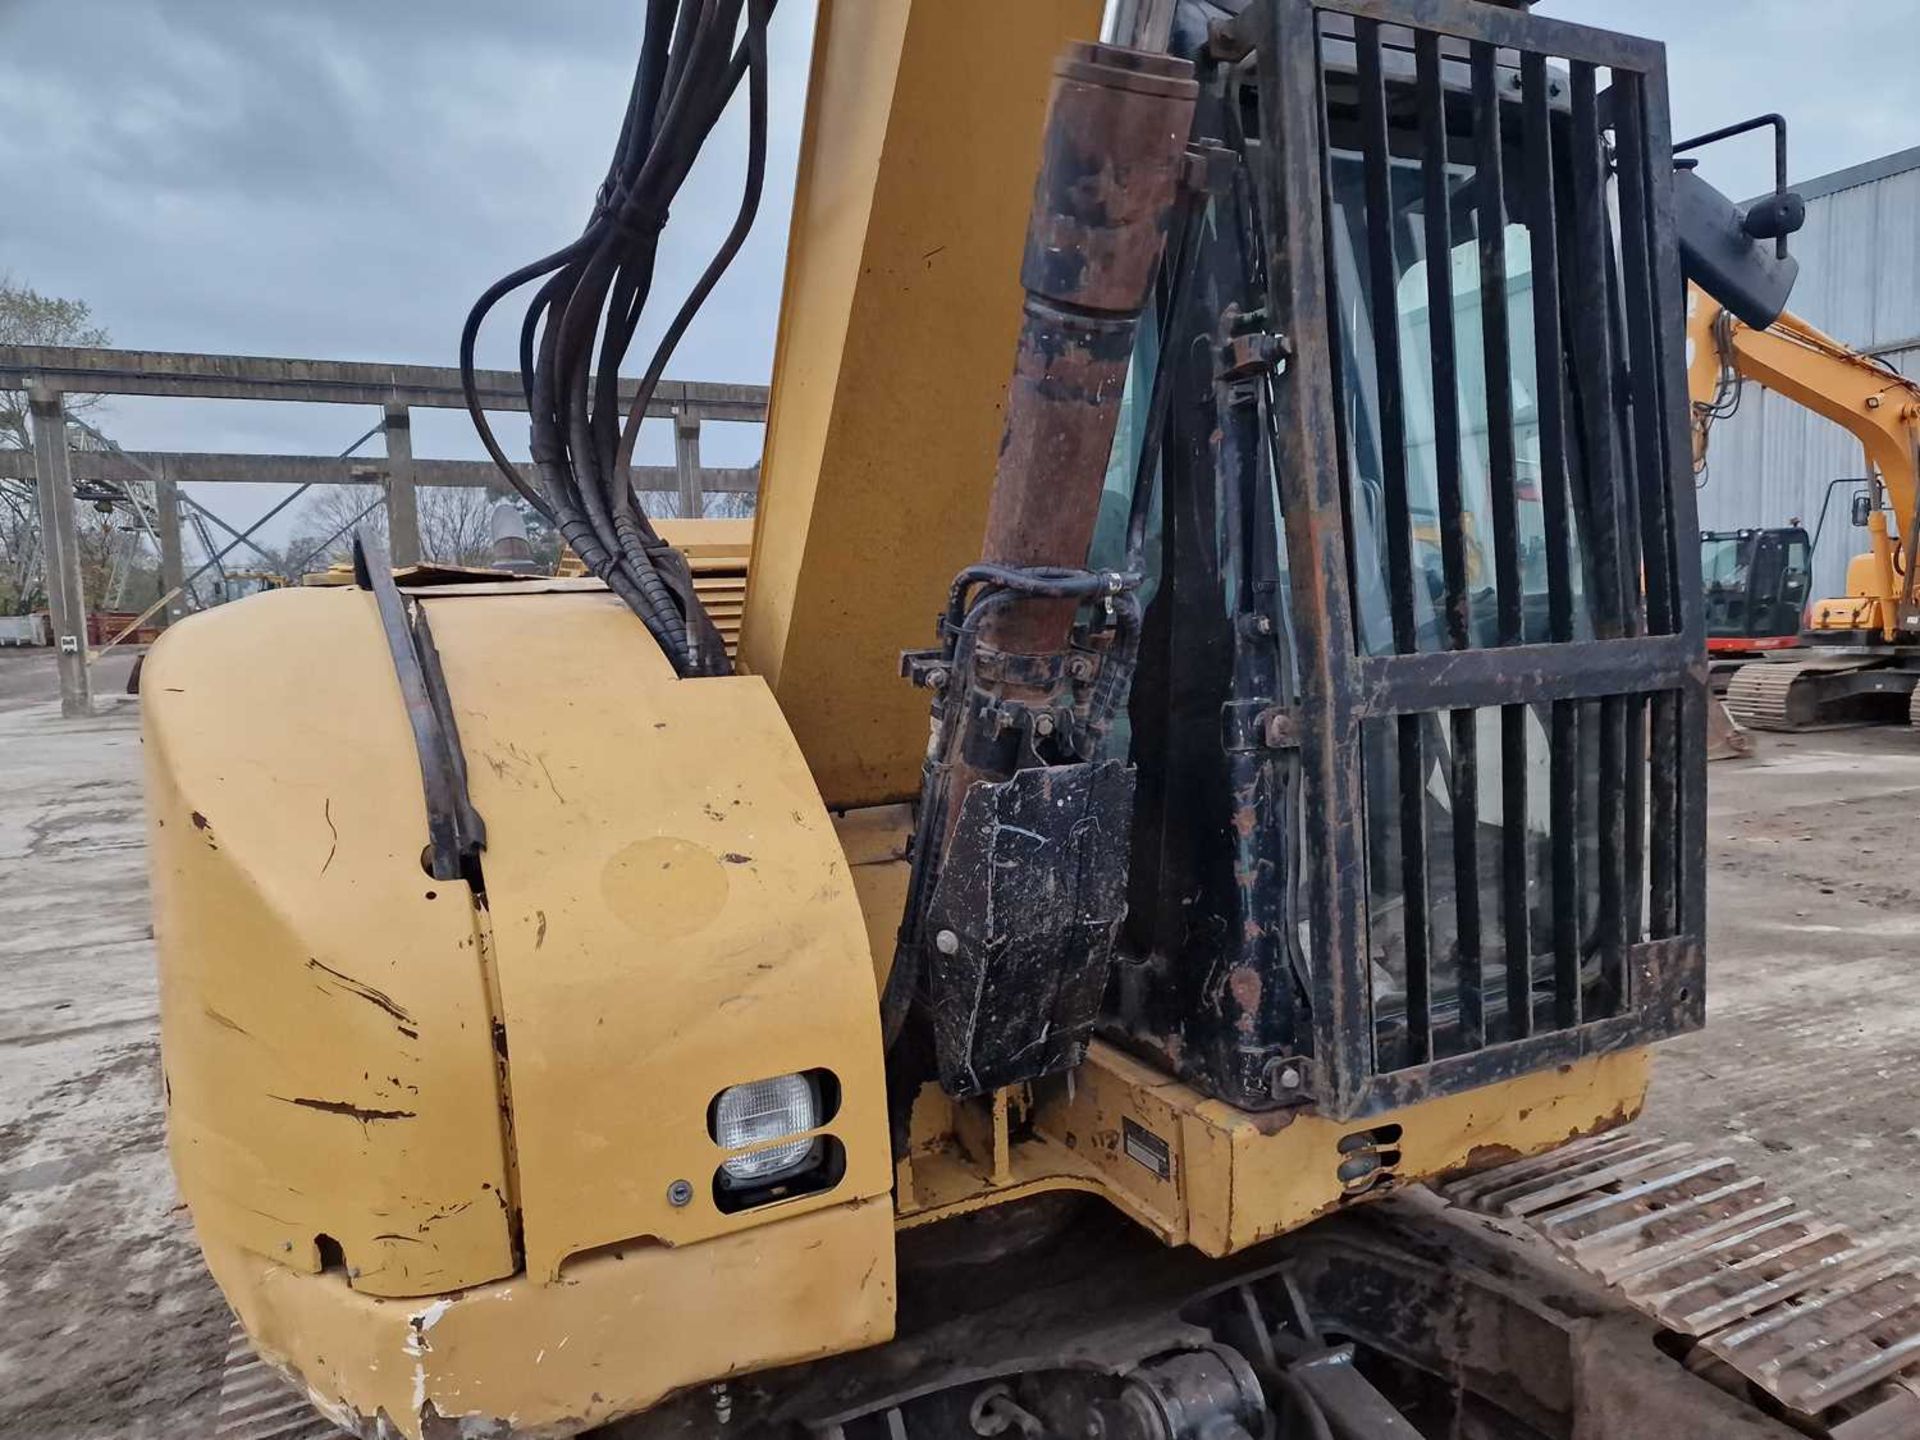 2008 CAT 308C CR 450mm Steel Tracks, Blade, CV, Hydraulic QH, Piped, Aux. Piping, A/C, Demo Cage - Image 13 of 102